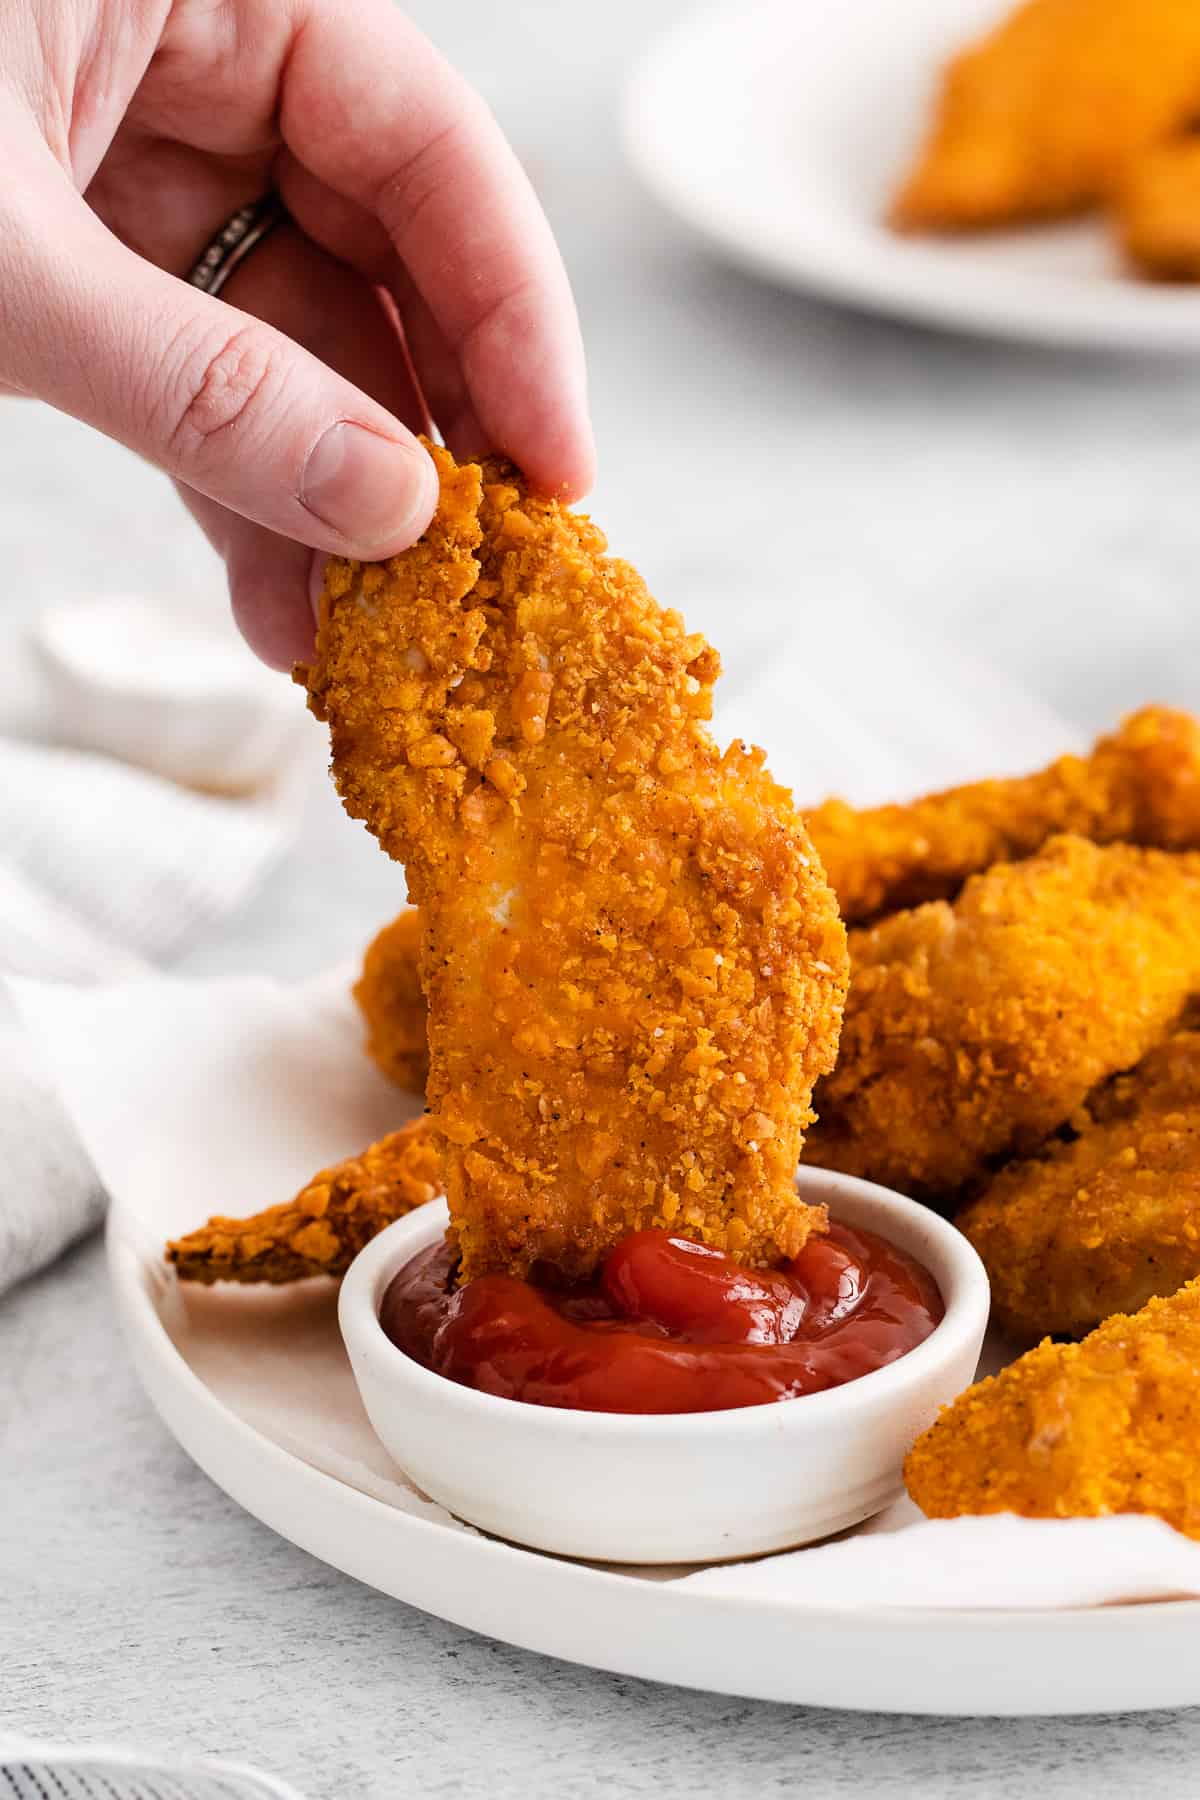 Hand dipping a chicken finger in ketchup.